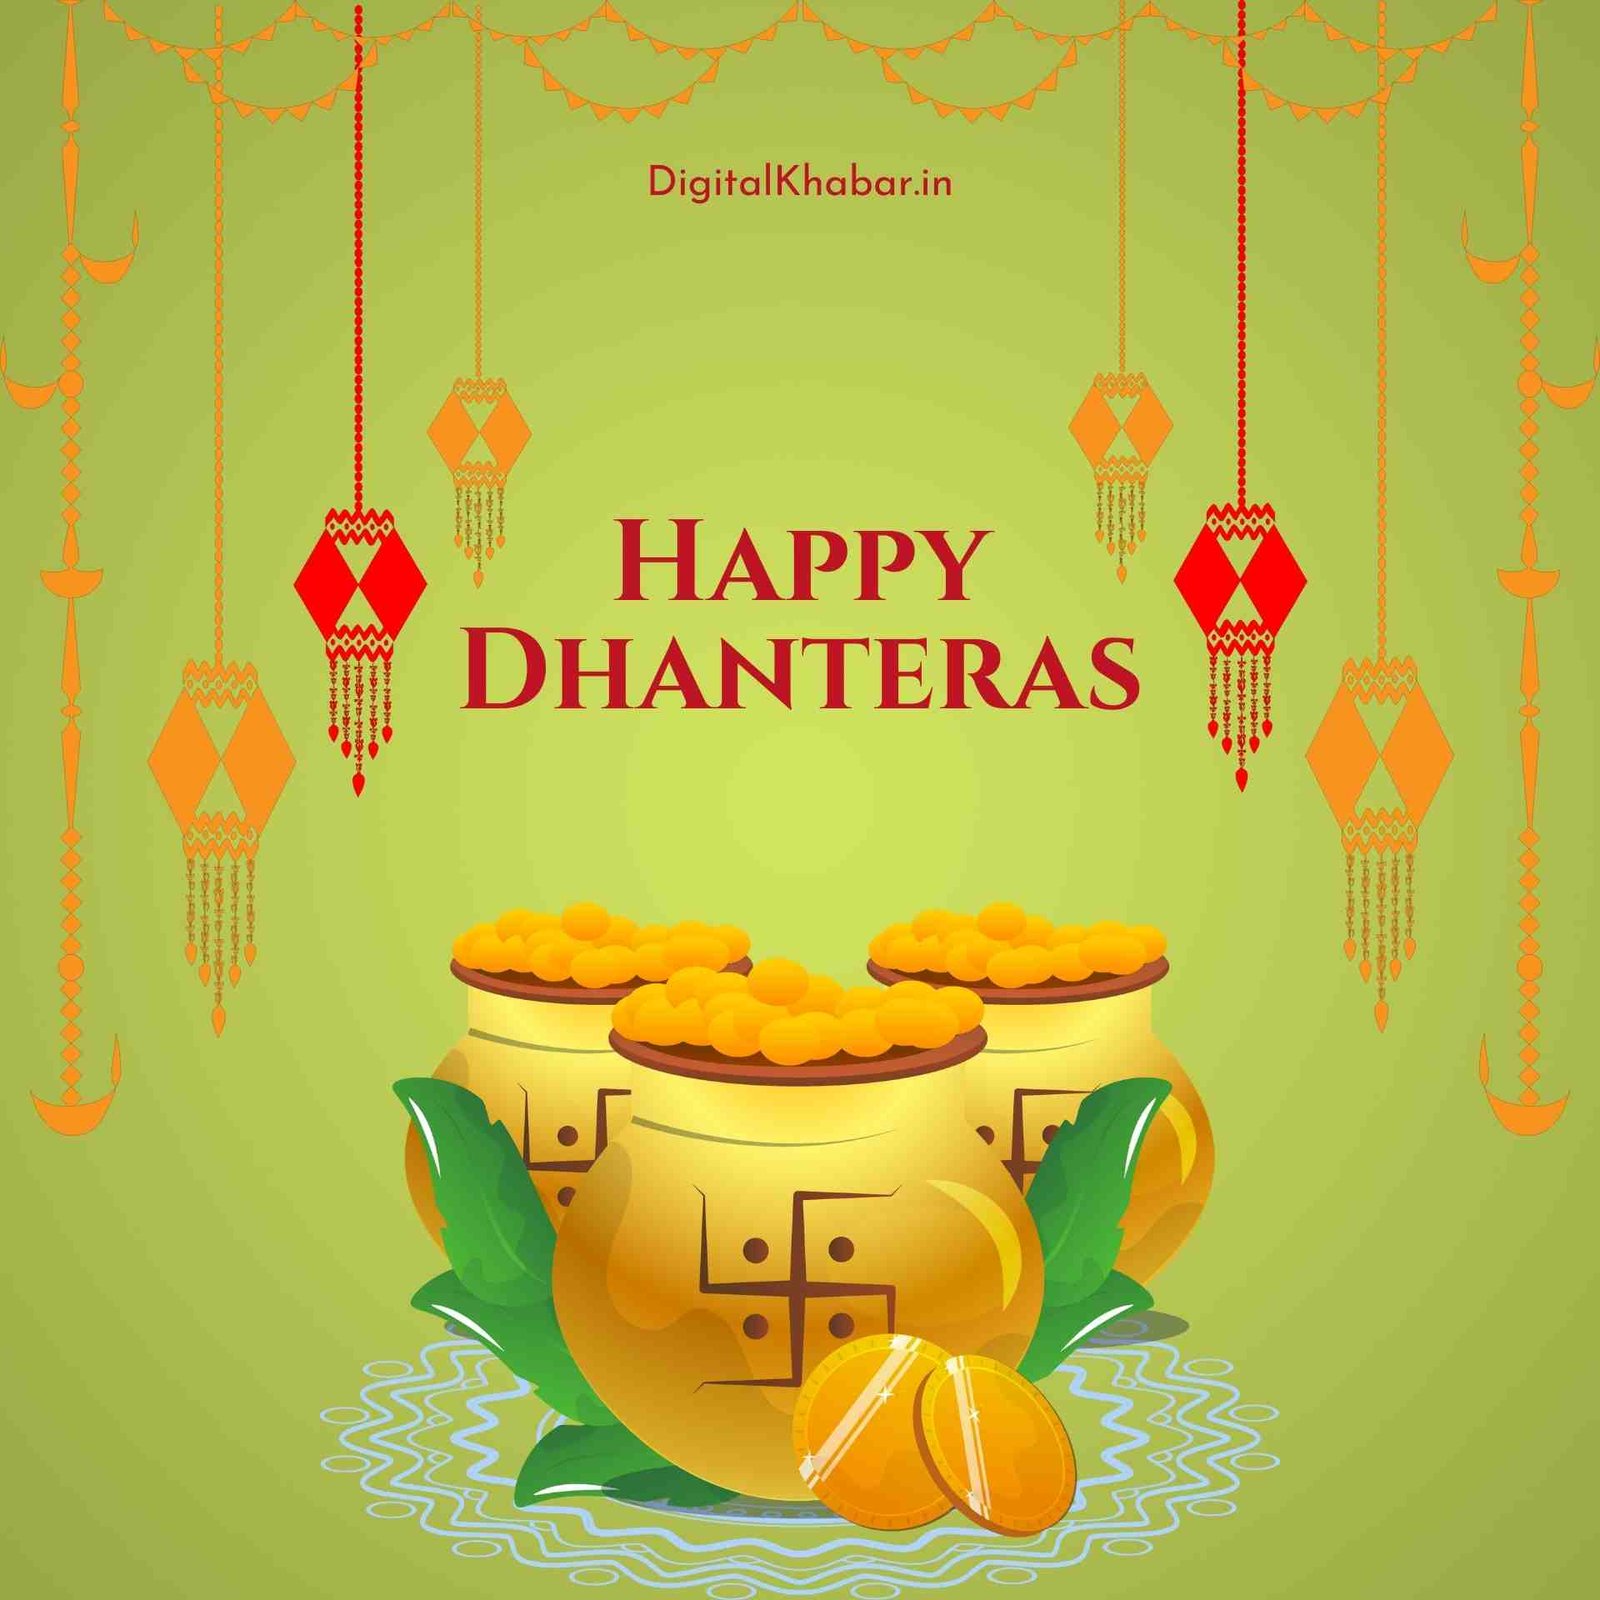 30+ New Happy Dhanteras Images for WhatsApp Status